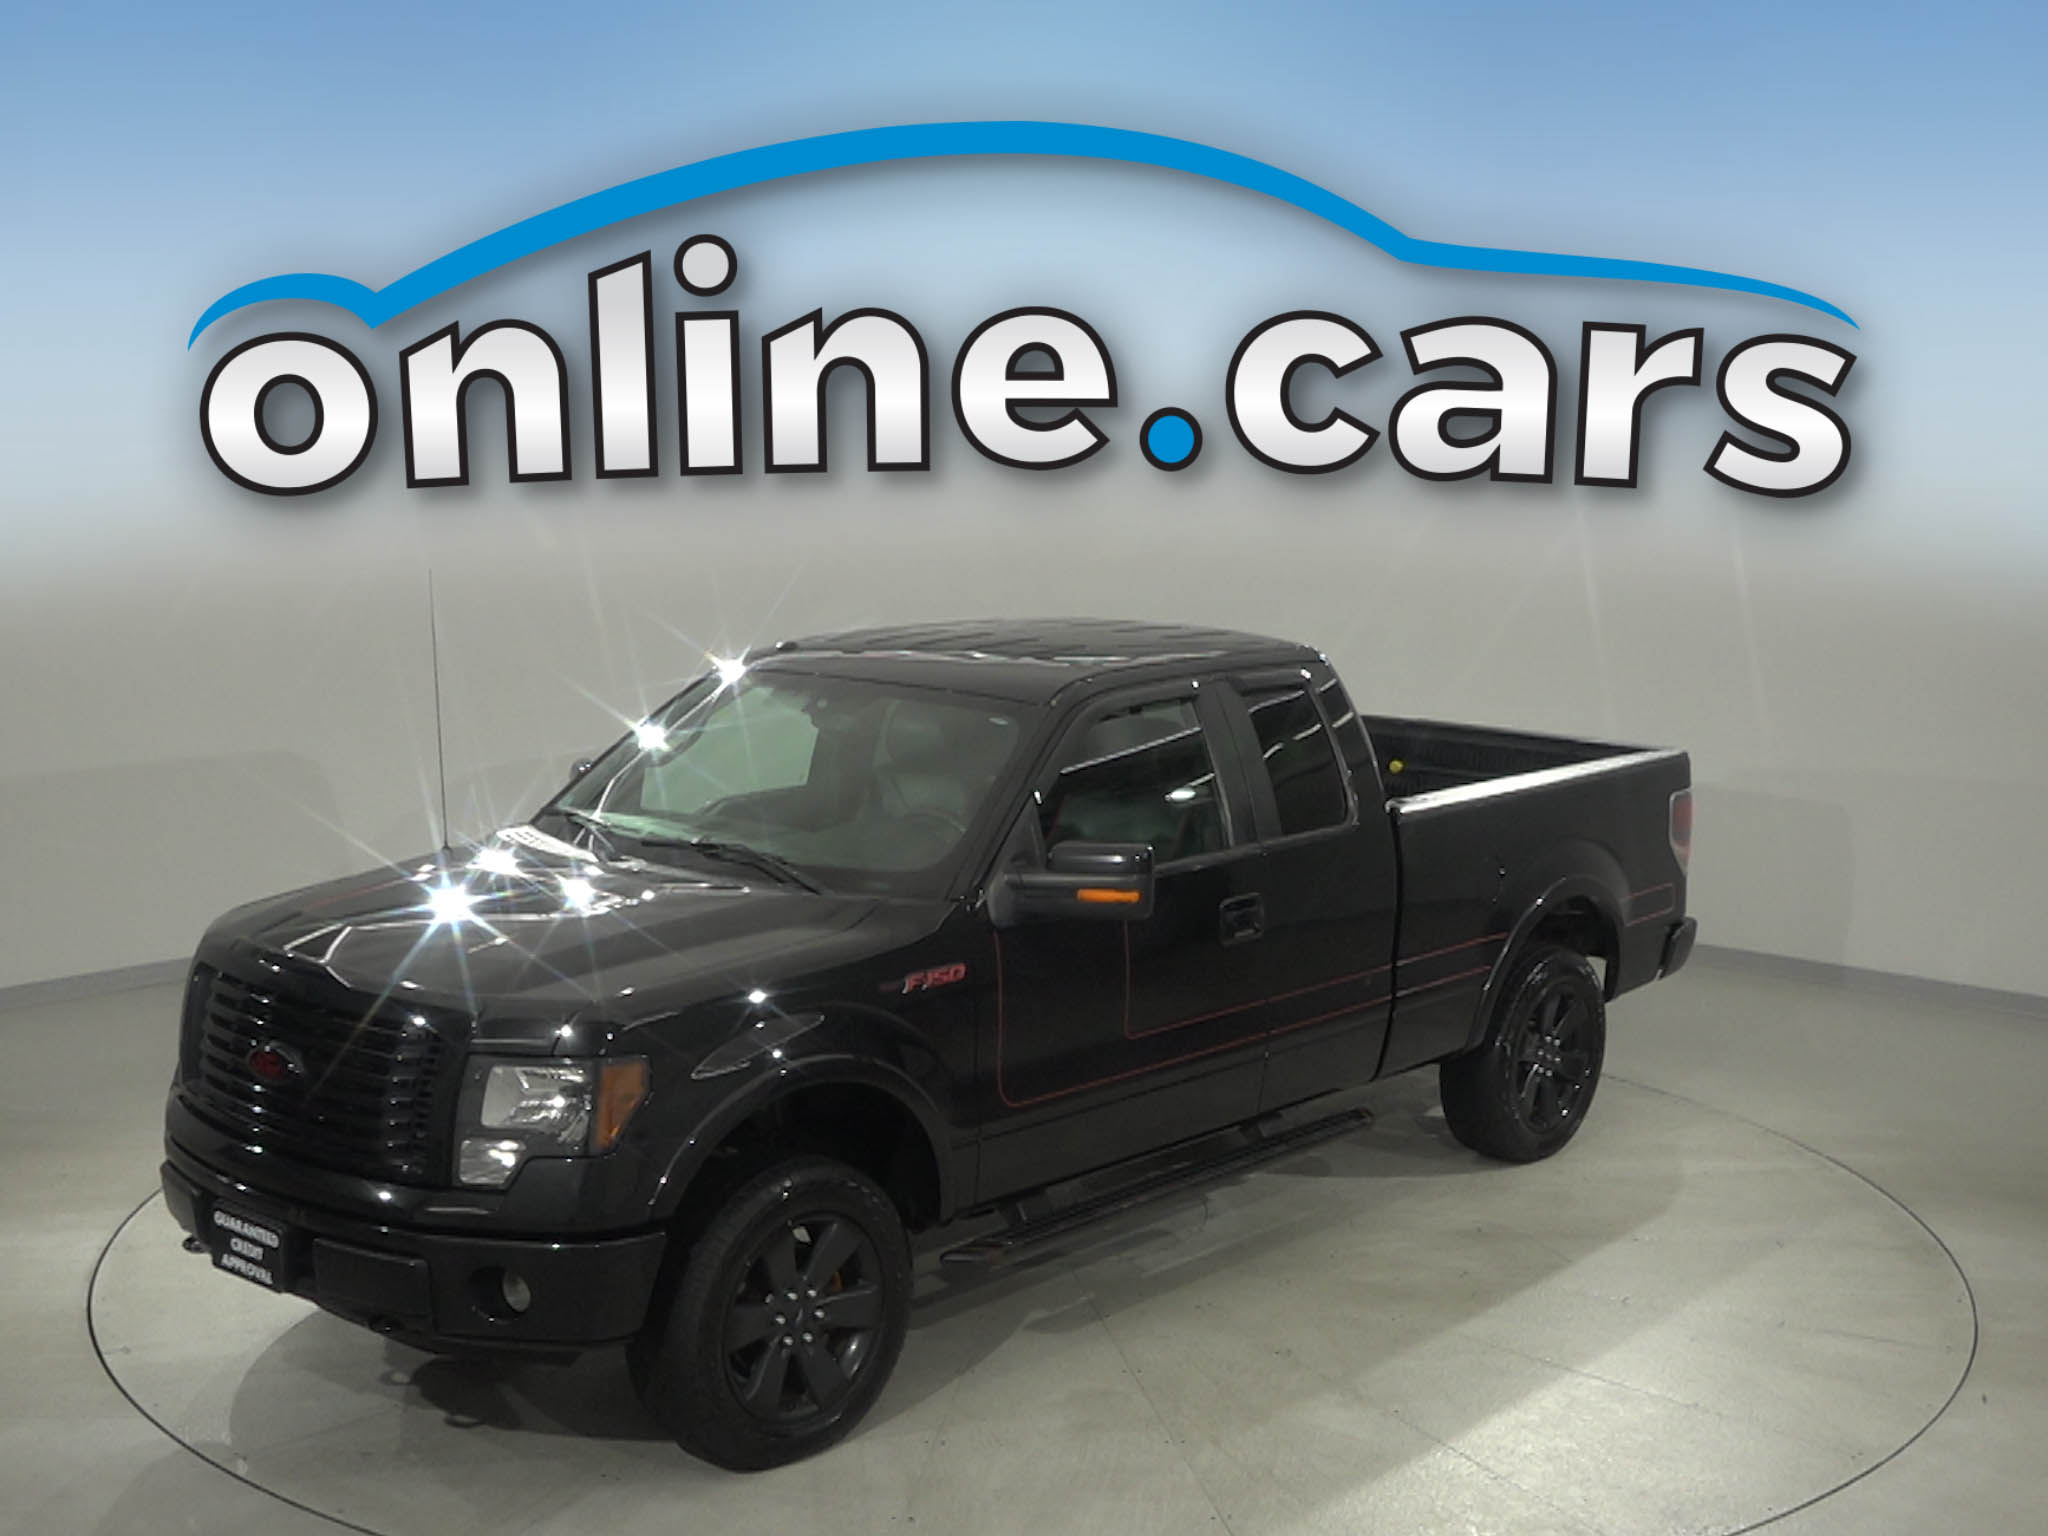 Used Ford F 150 Onlinecars